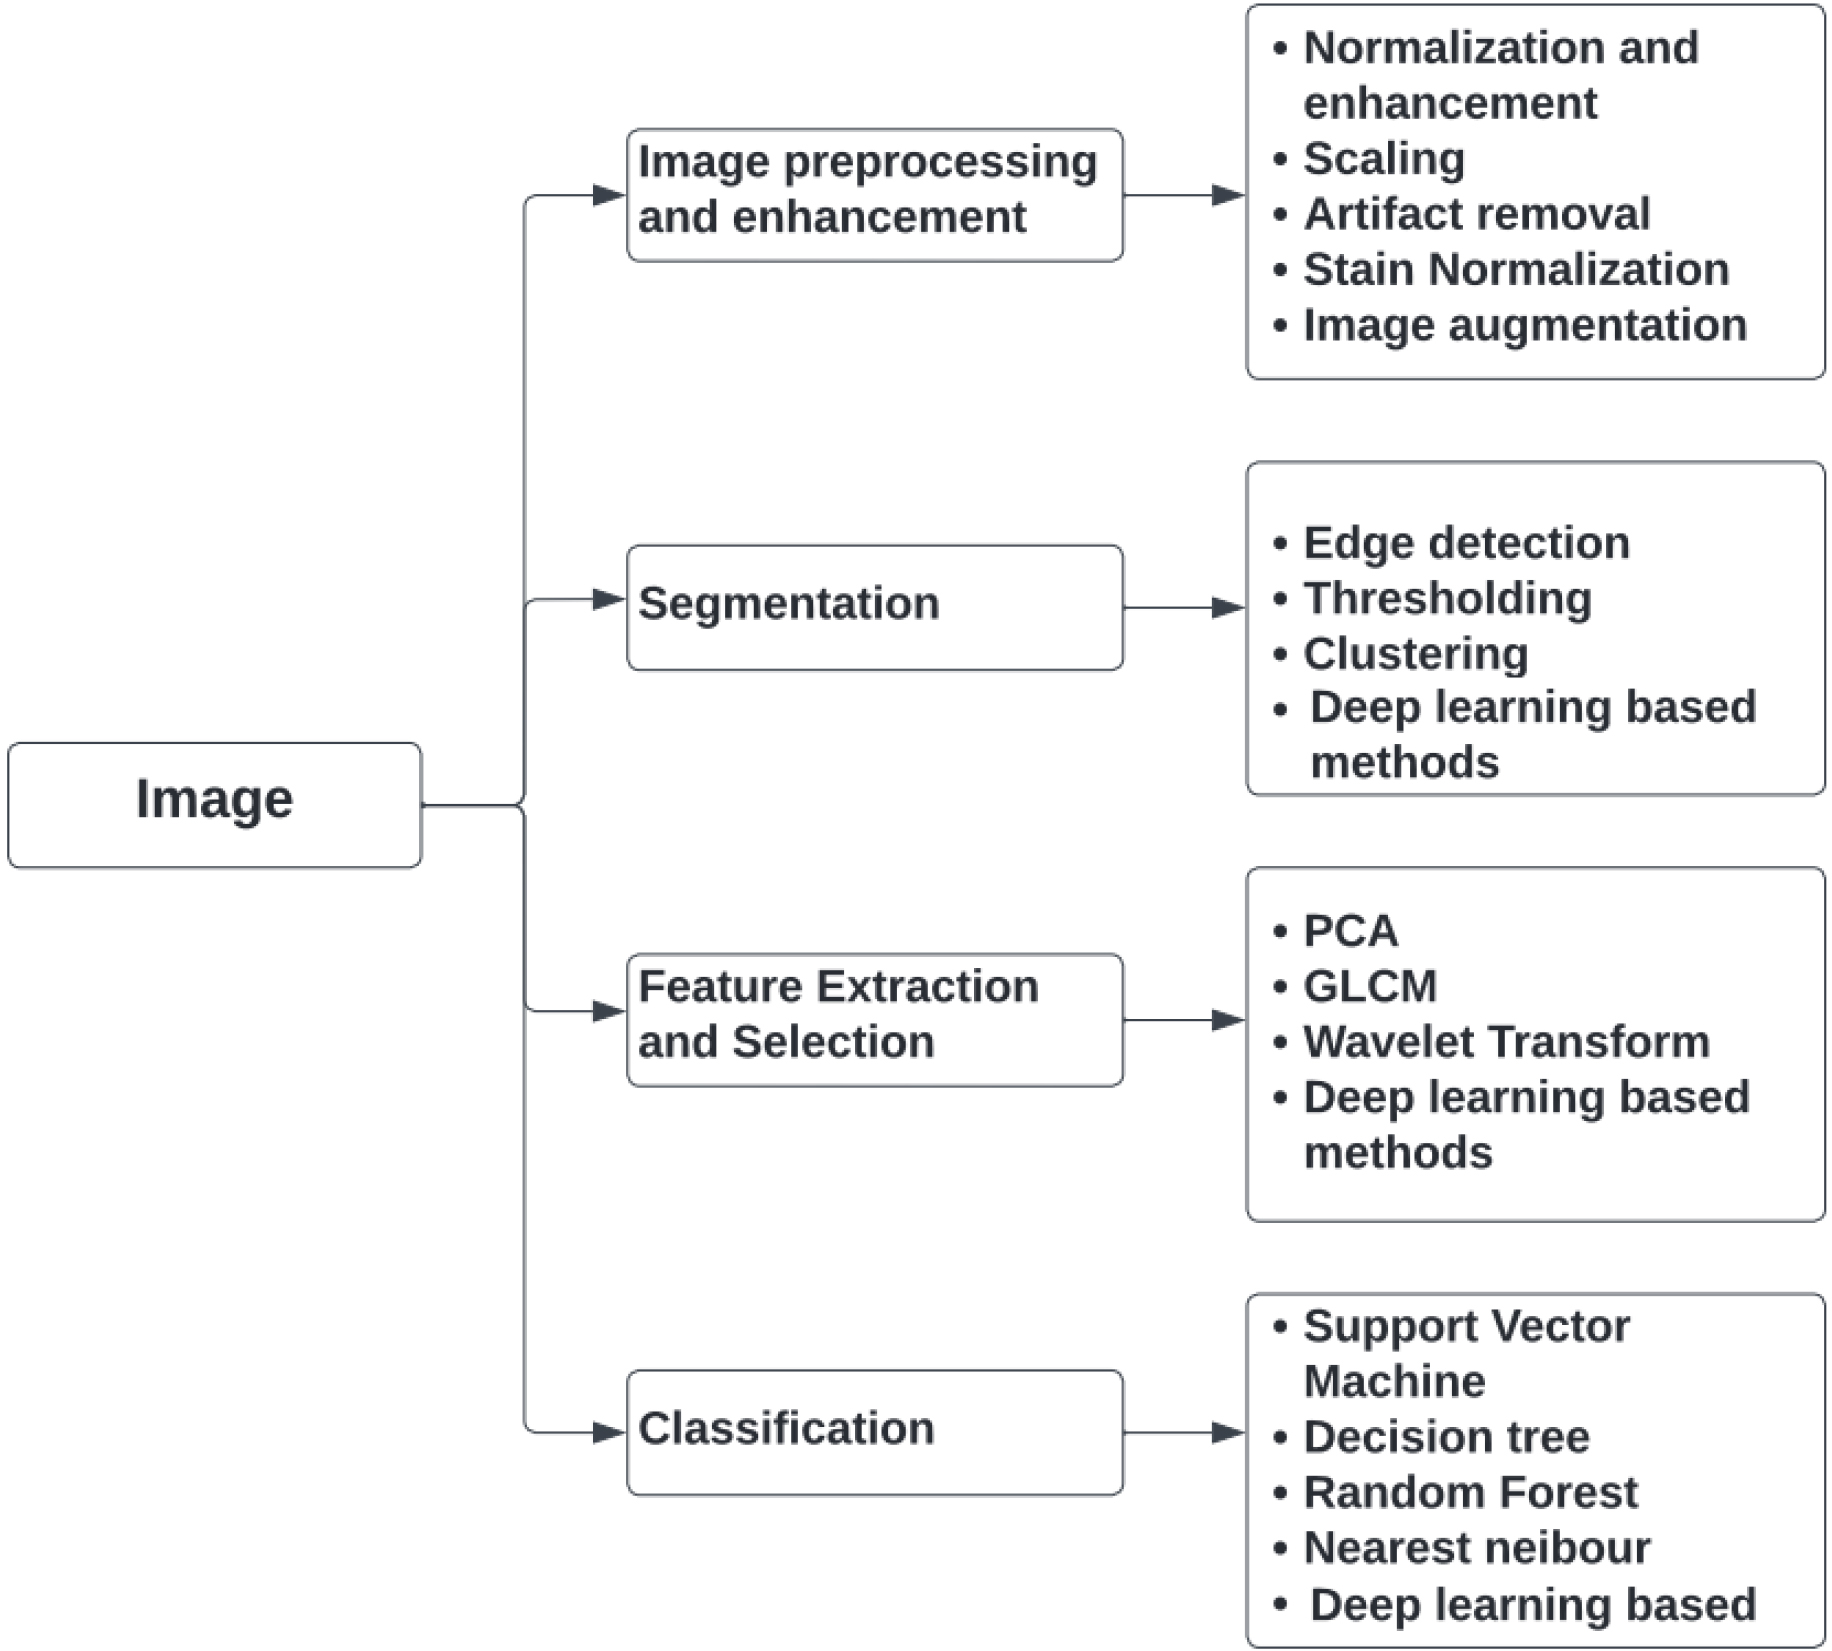 Overview of various image processing techniques used in the CAD of breast cancer detection.